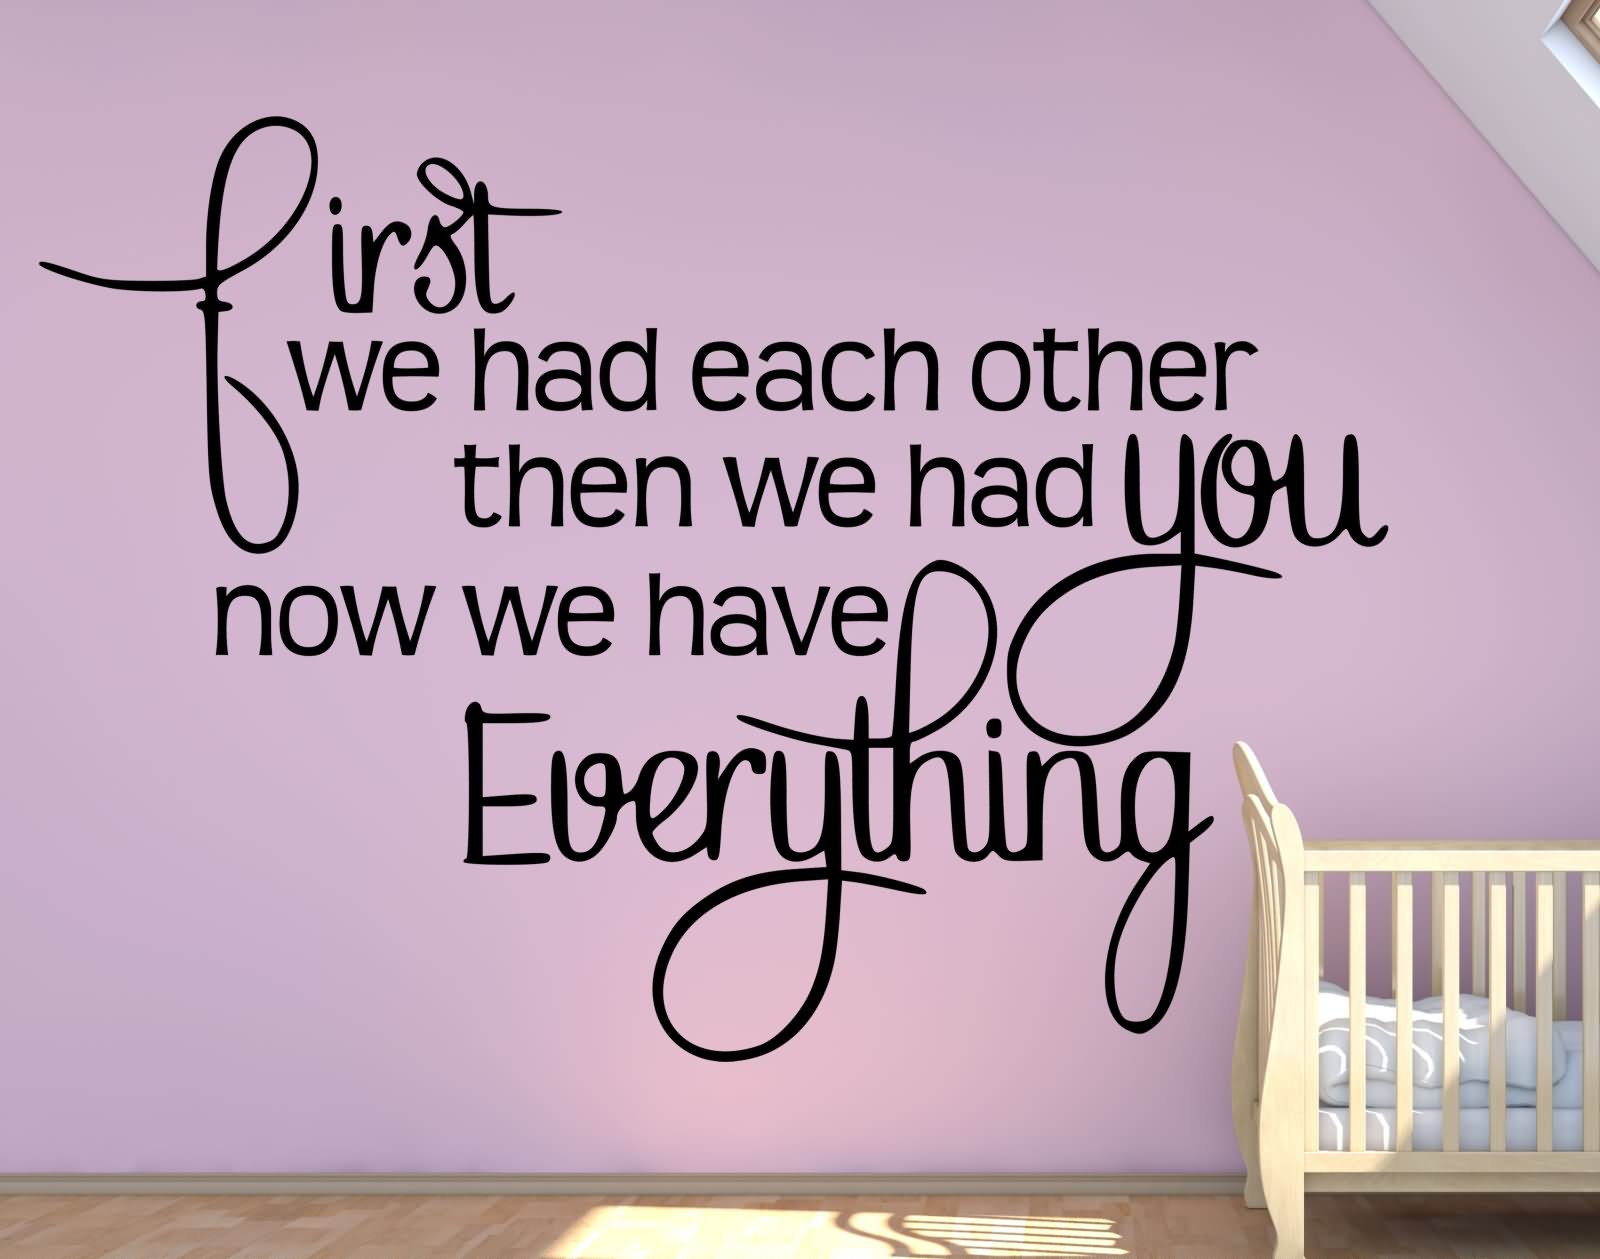 First we had each other then we had you, now we have everything.